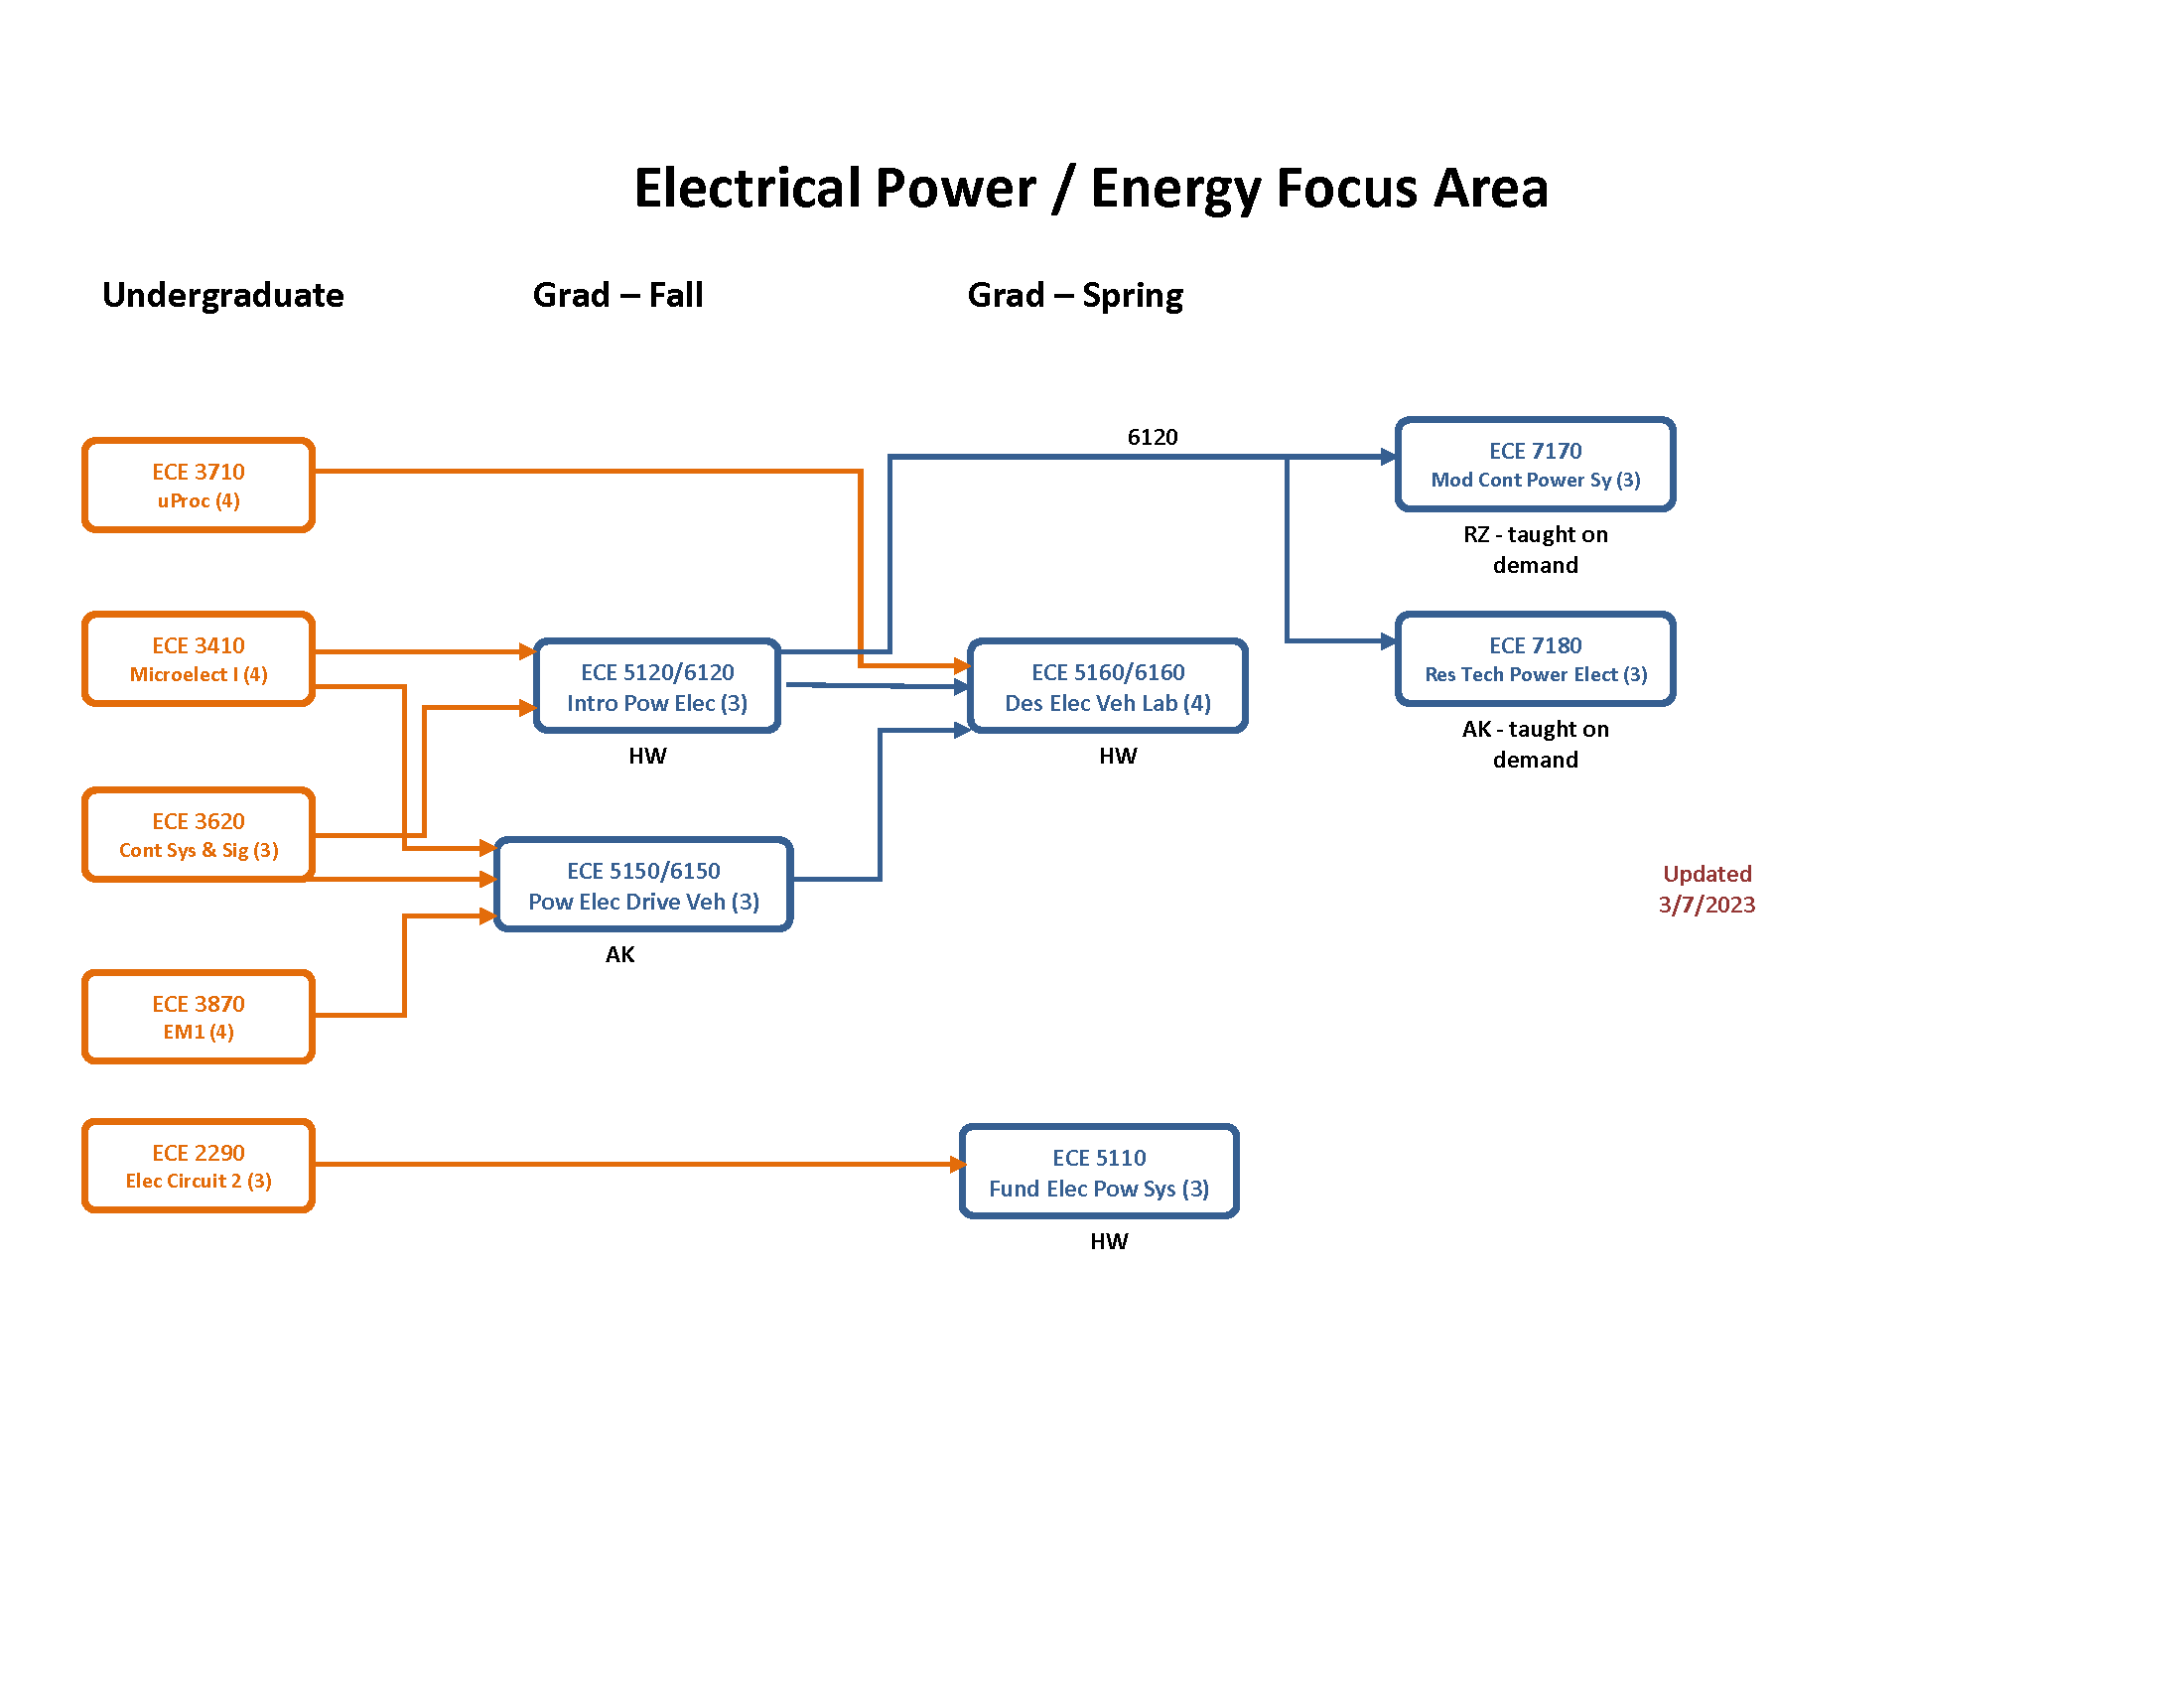 Electrical Power / Energy Focus Area flow chart